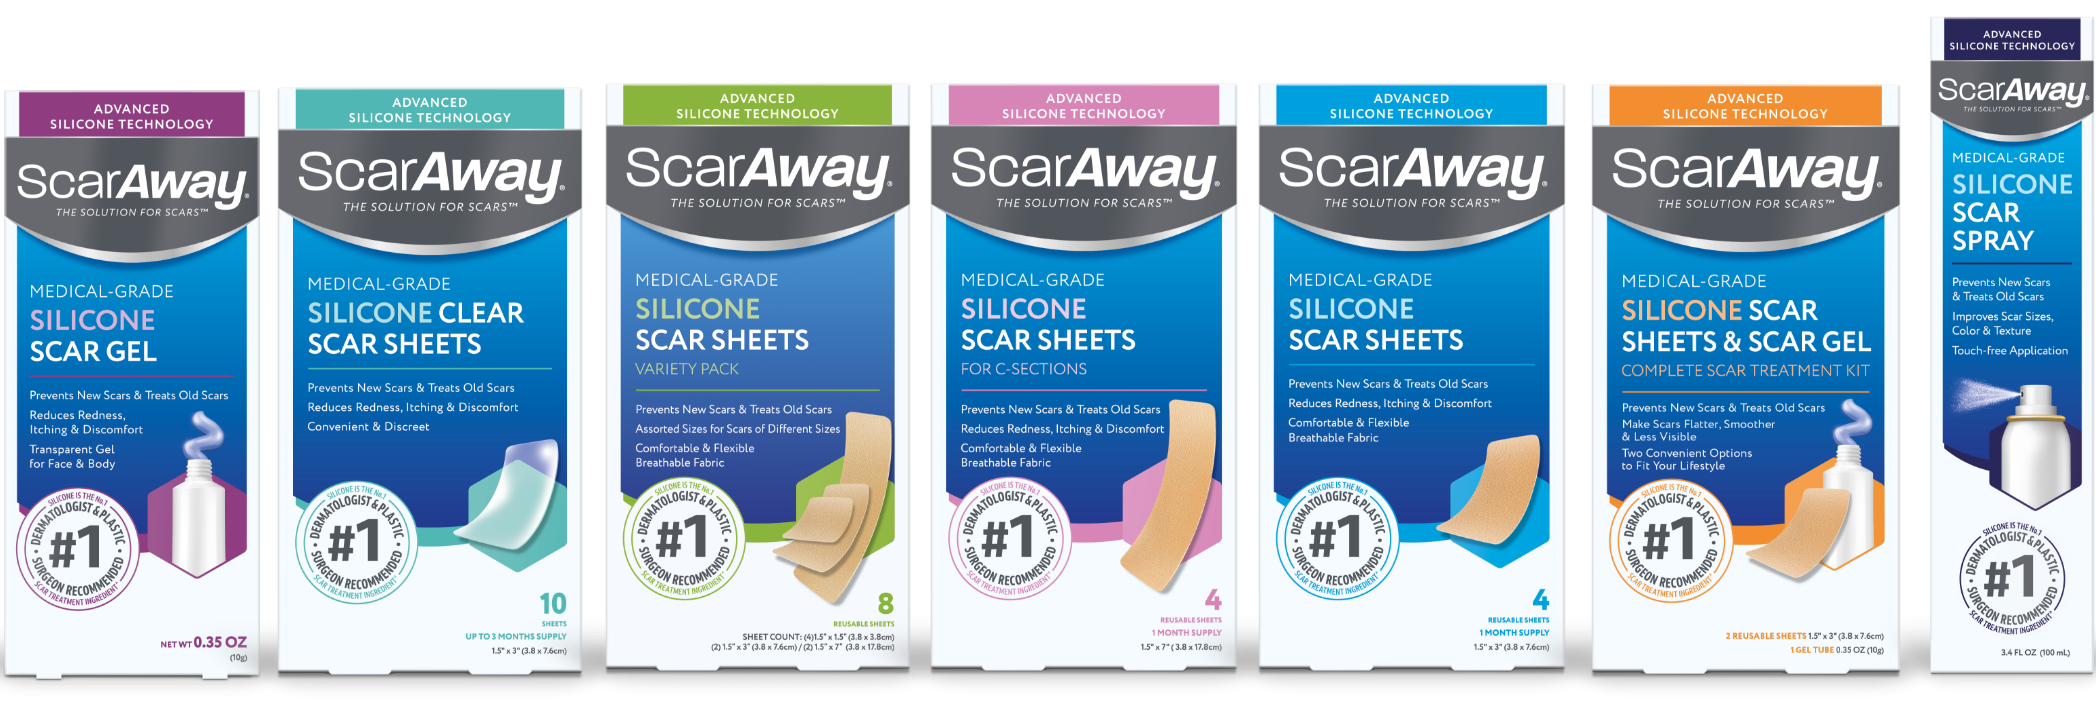 Silicone Scar Sheets 1.5 in x 3 in